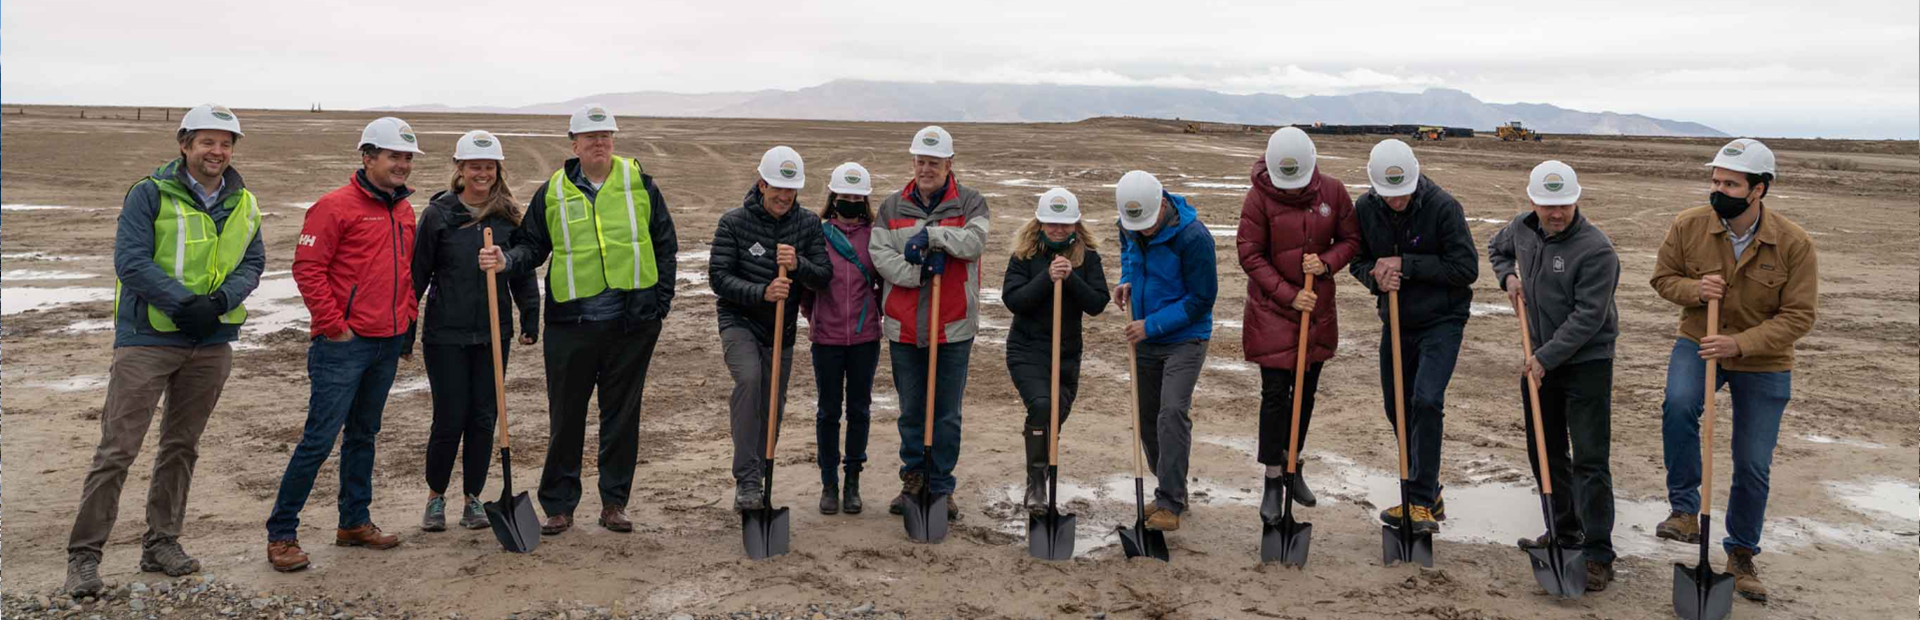 Group of 13 people putting shovels into the ground to symbolize the groundbreaking of the solar farm